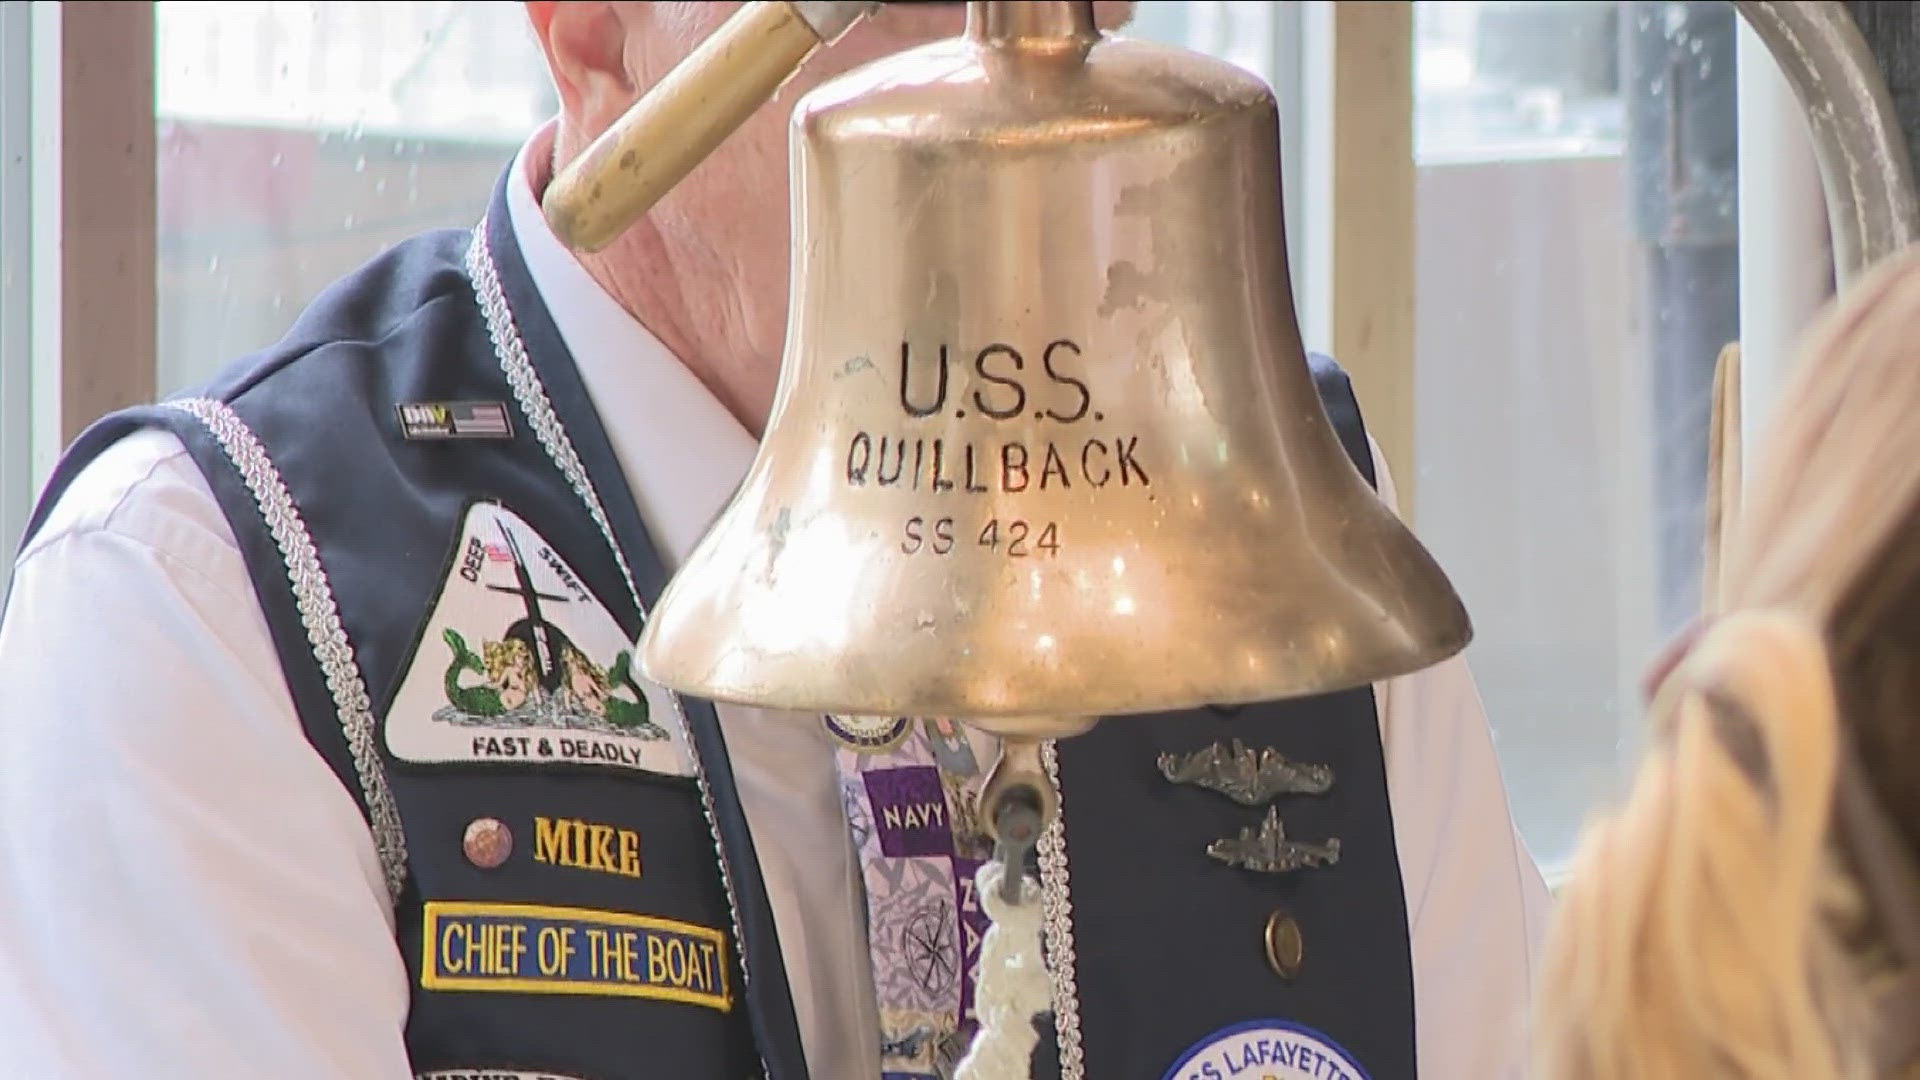 They remembered those lost on submarines during World War II by ringing a bell 52 times, representing the number of subs that went down during the war.